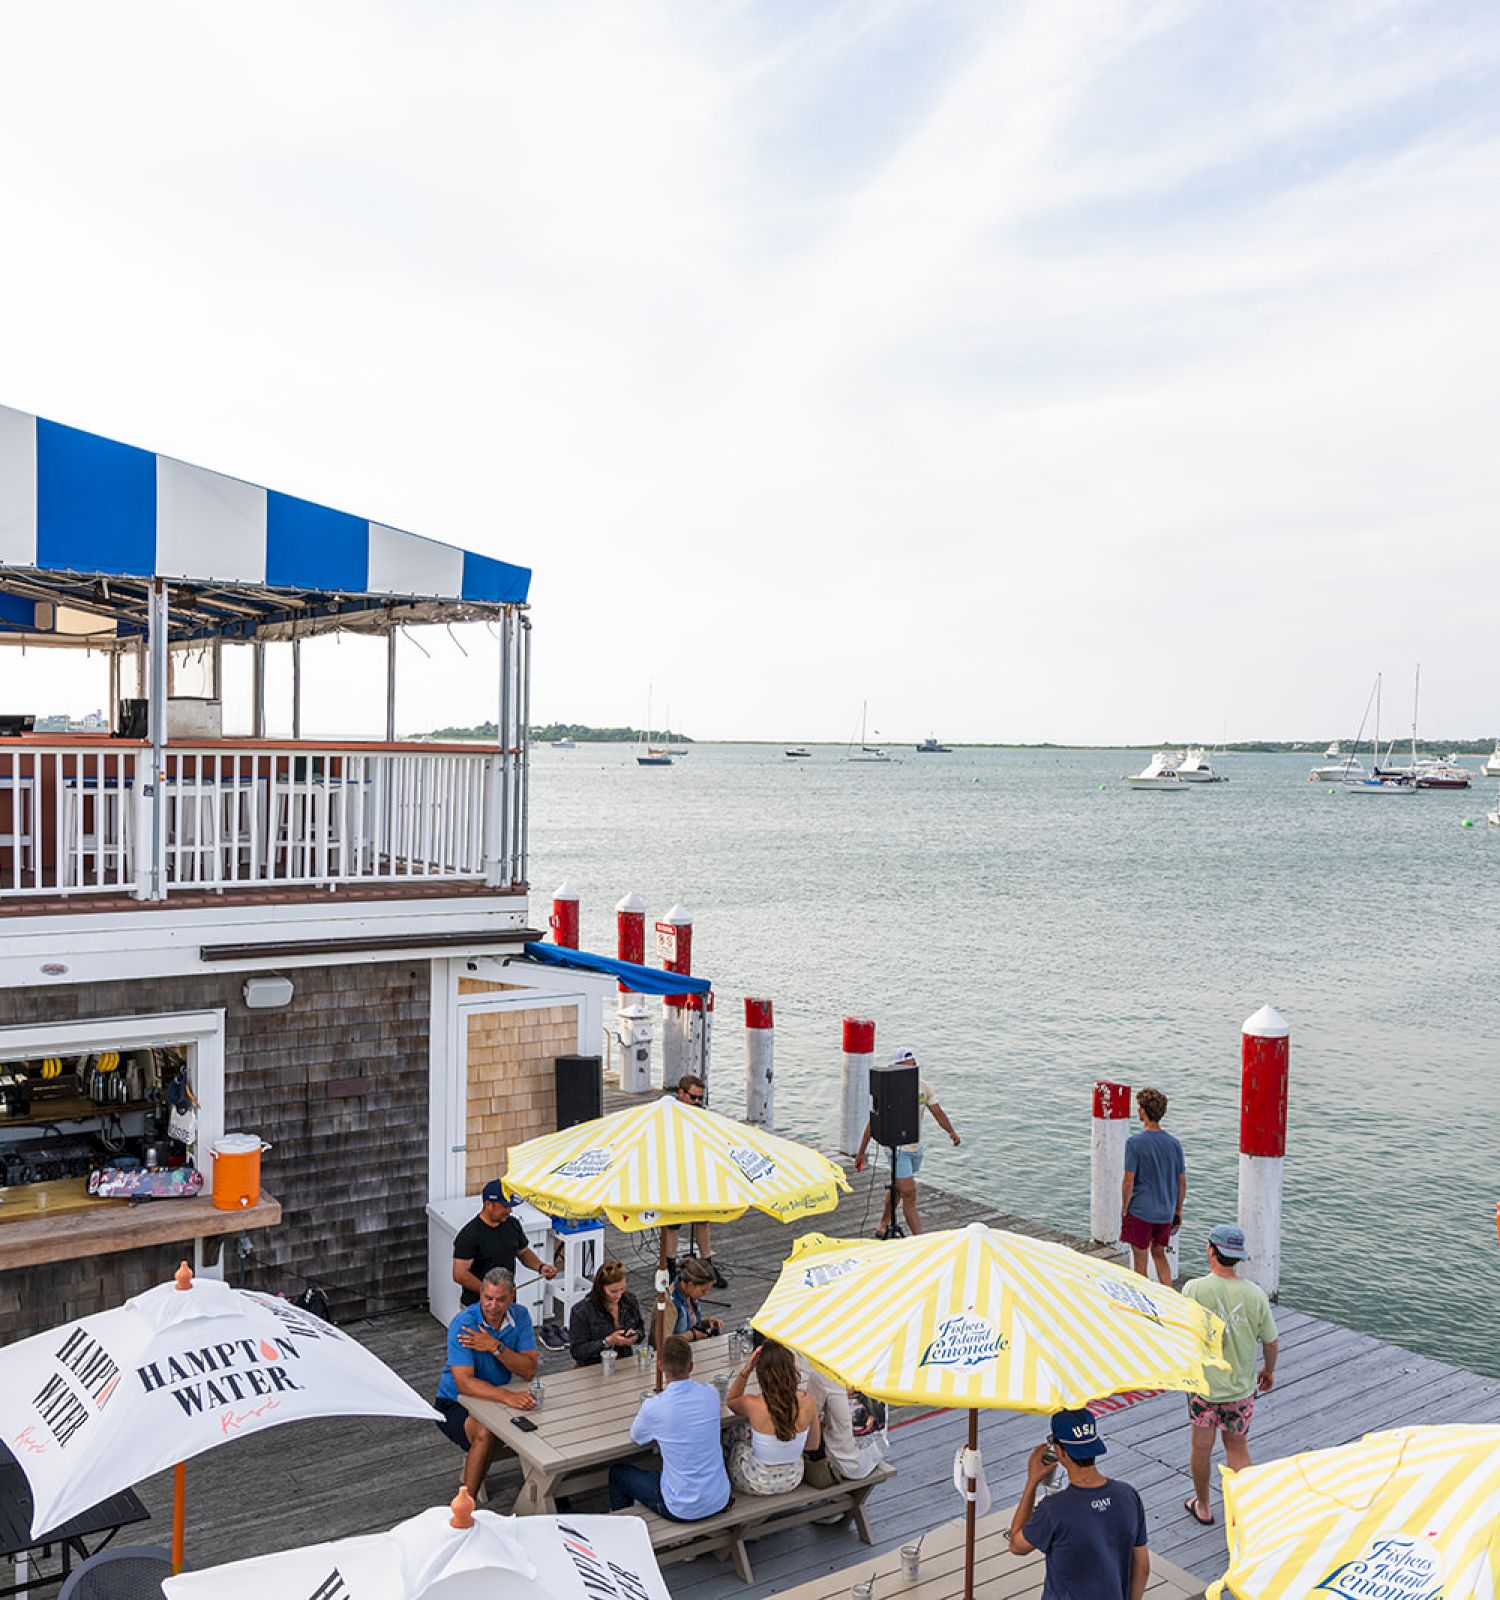 People are dining at an outdoor waterfront restaurant with yellow and white umbrellas, overlooking a marina with boats in the background.